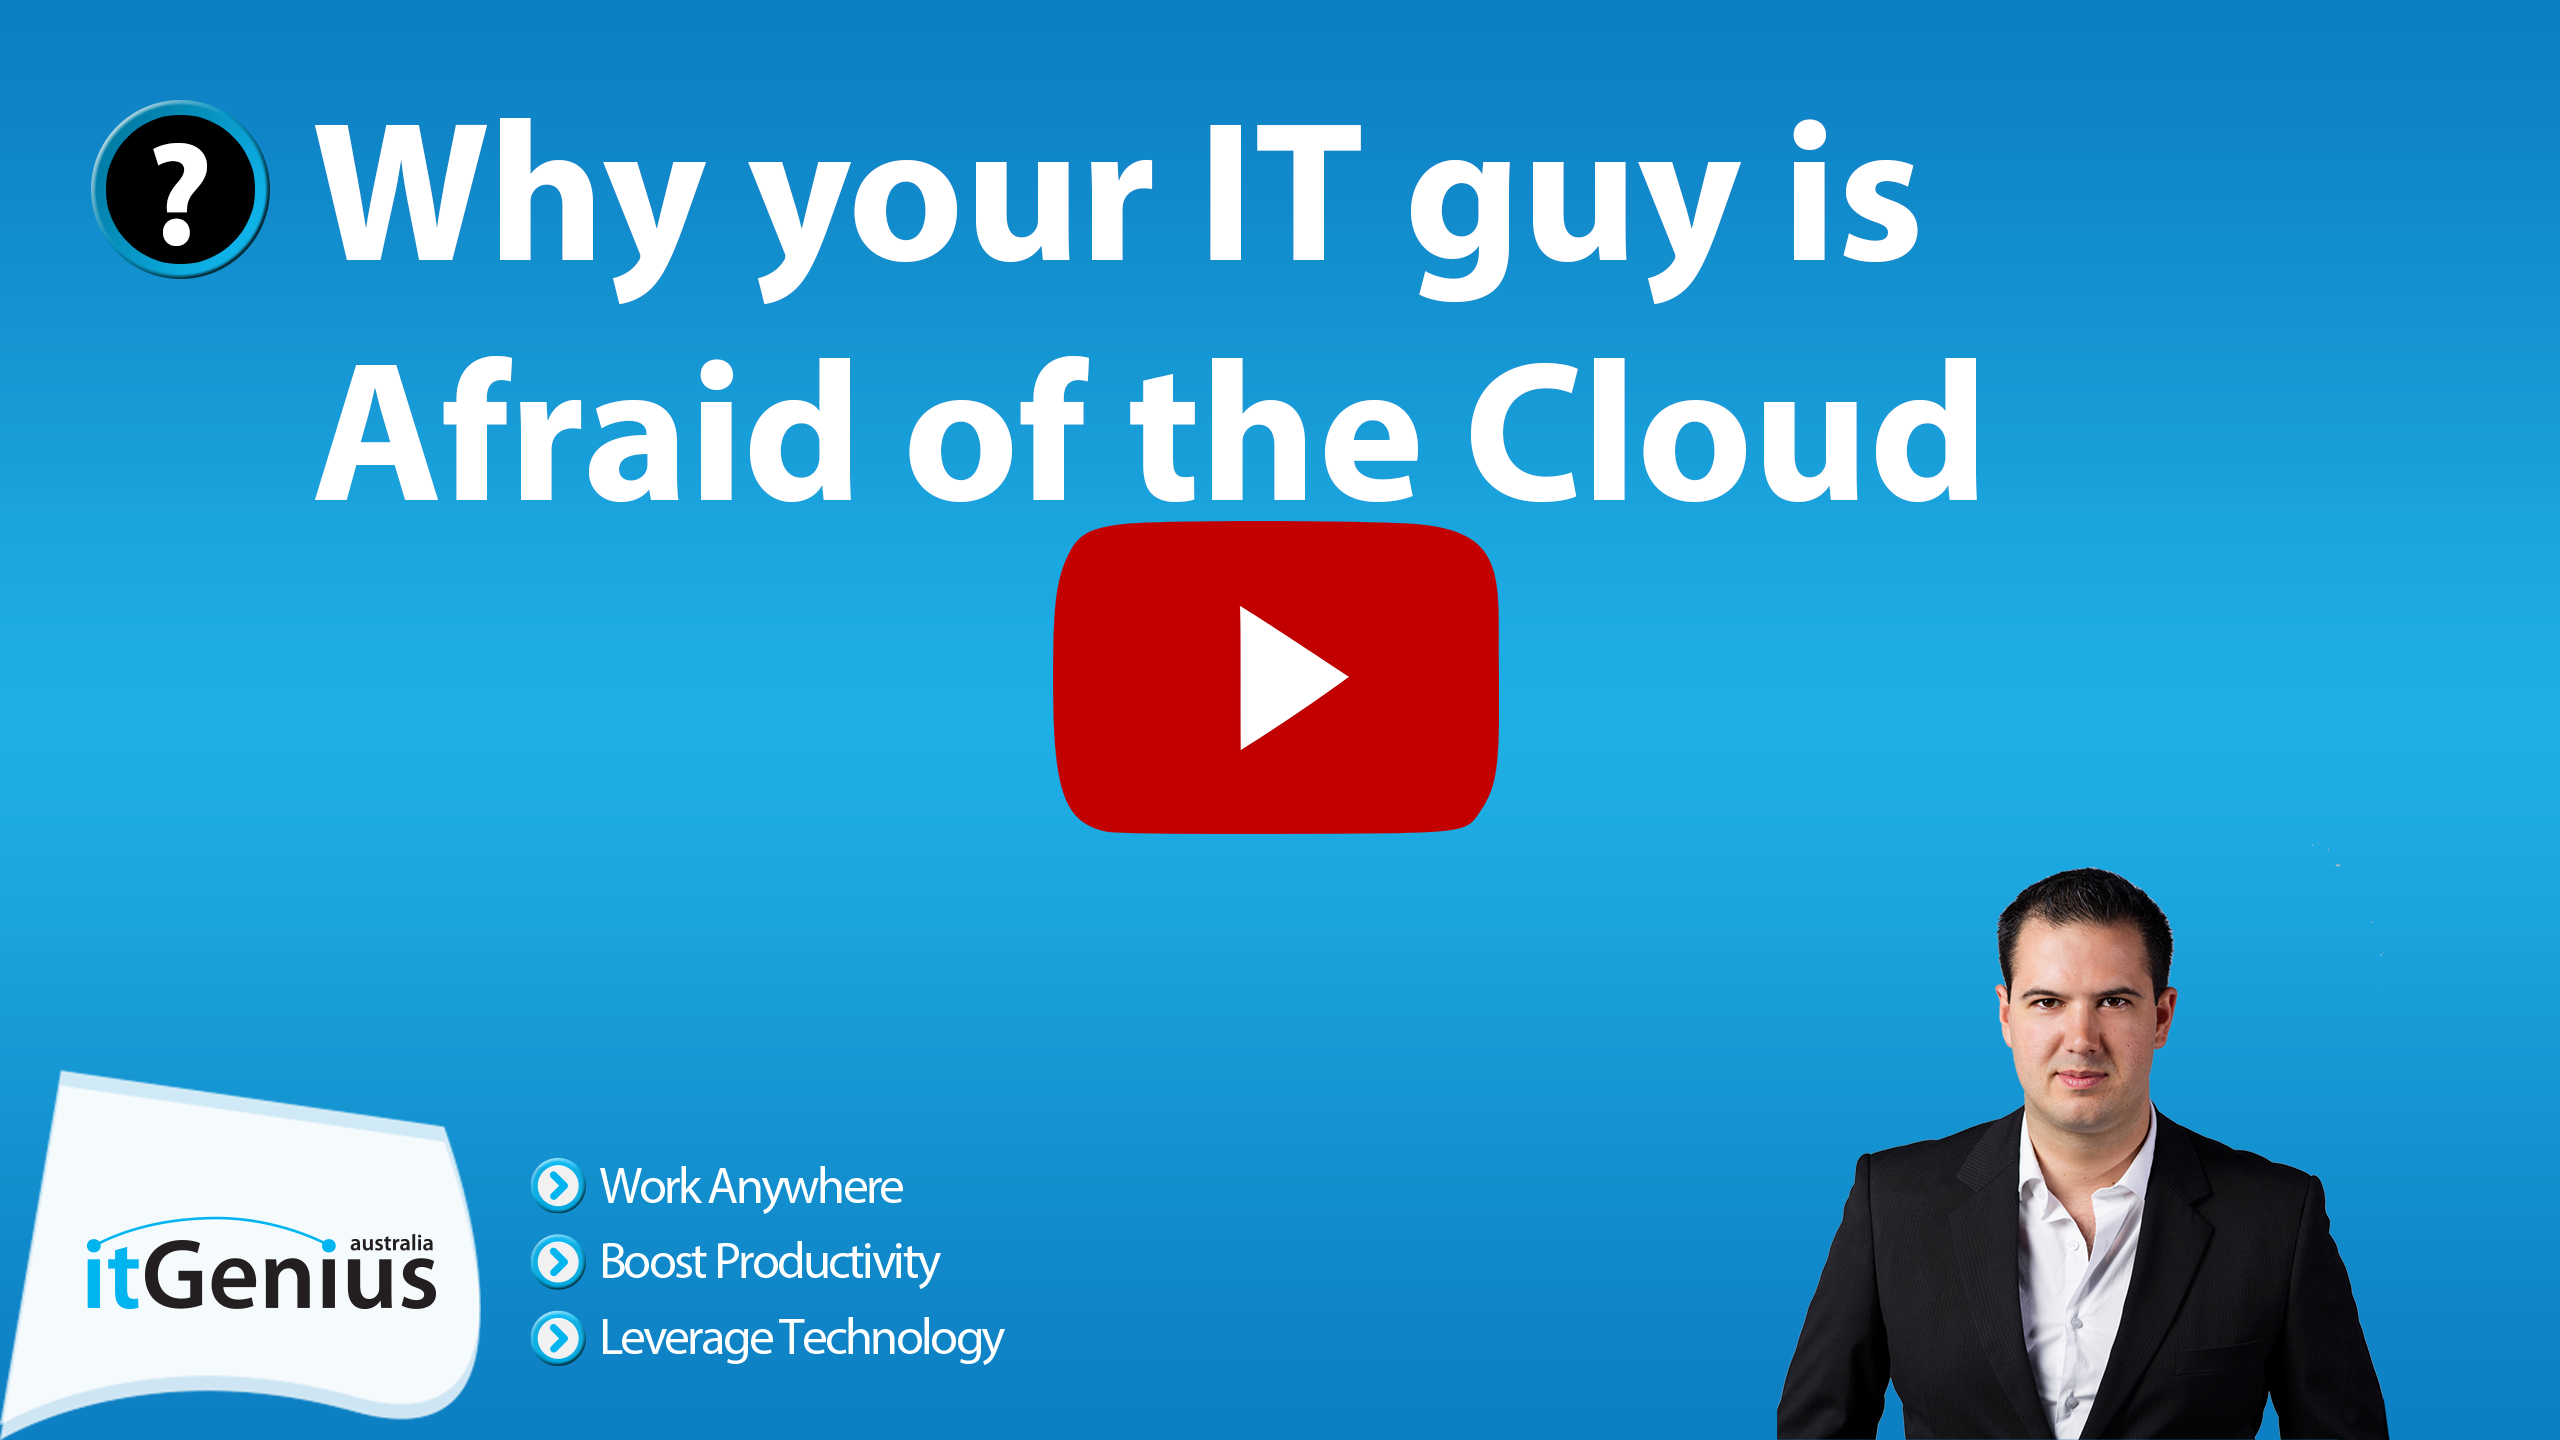 Why your IT guy is Afraid of the Cloud